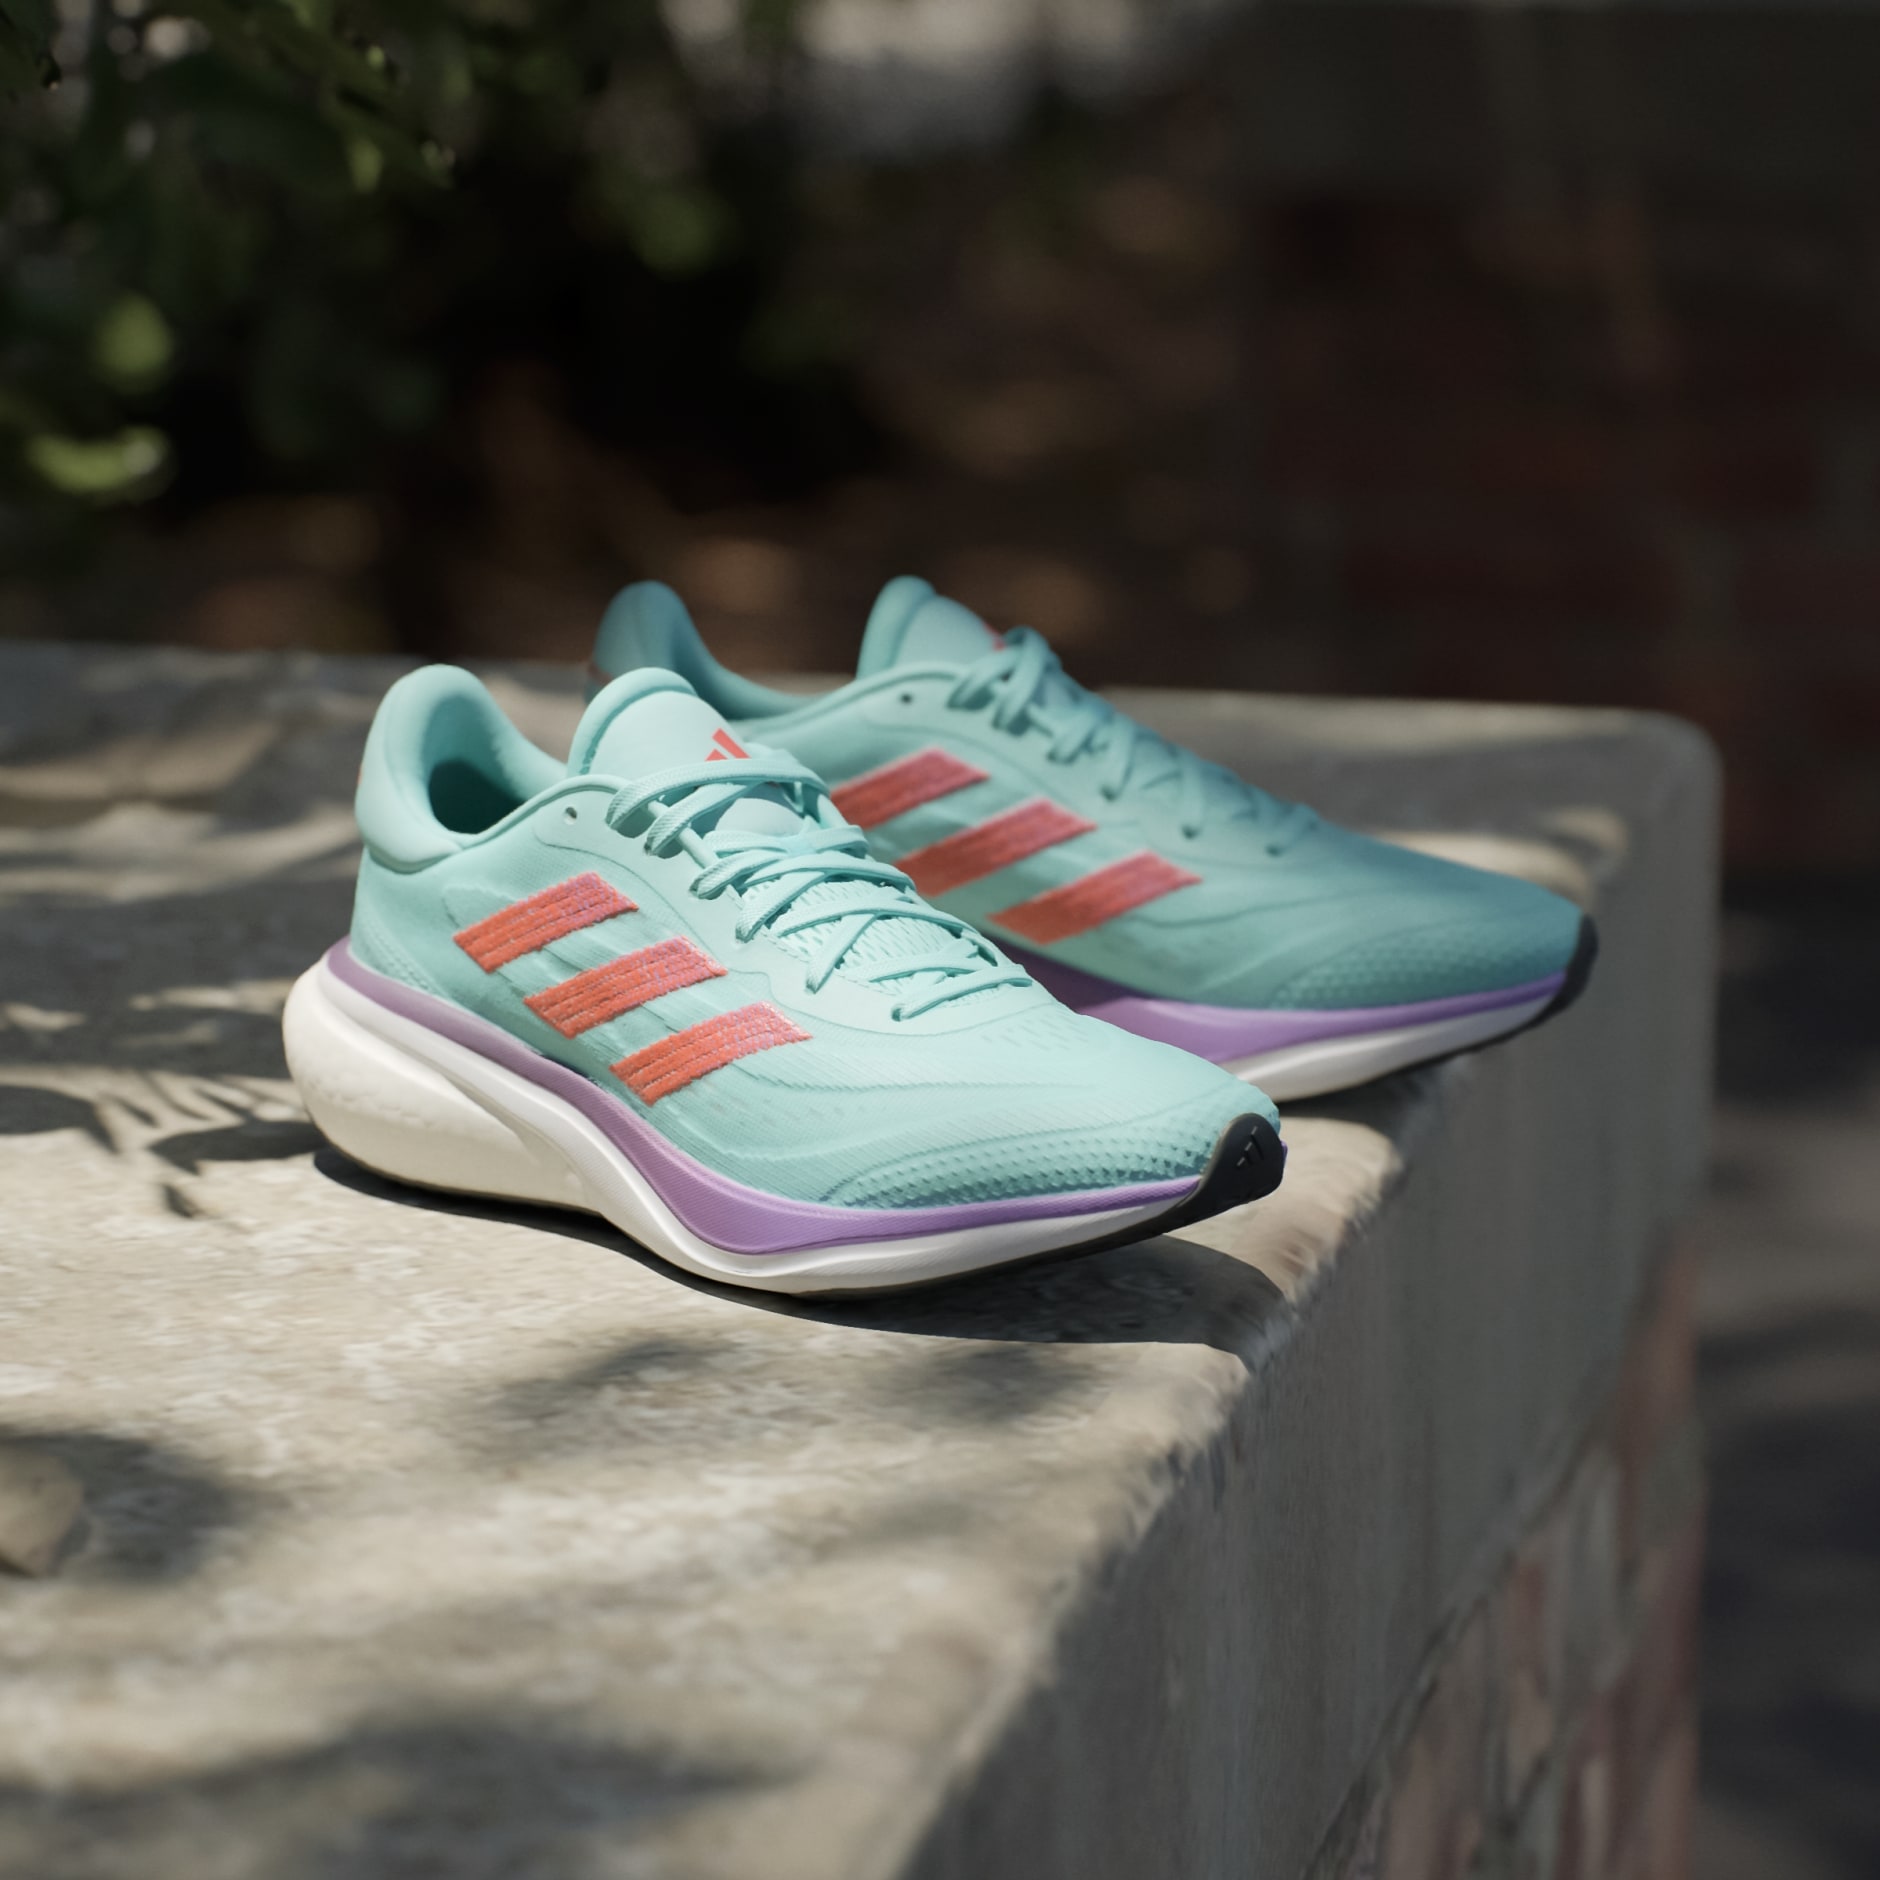 Shoes - Supernova 3 Running Shoes - Turquoise | adidas South Africa